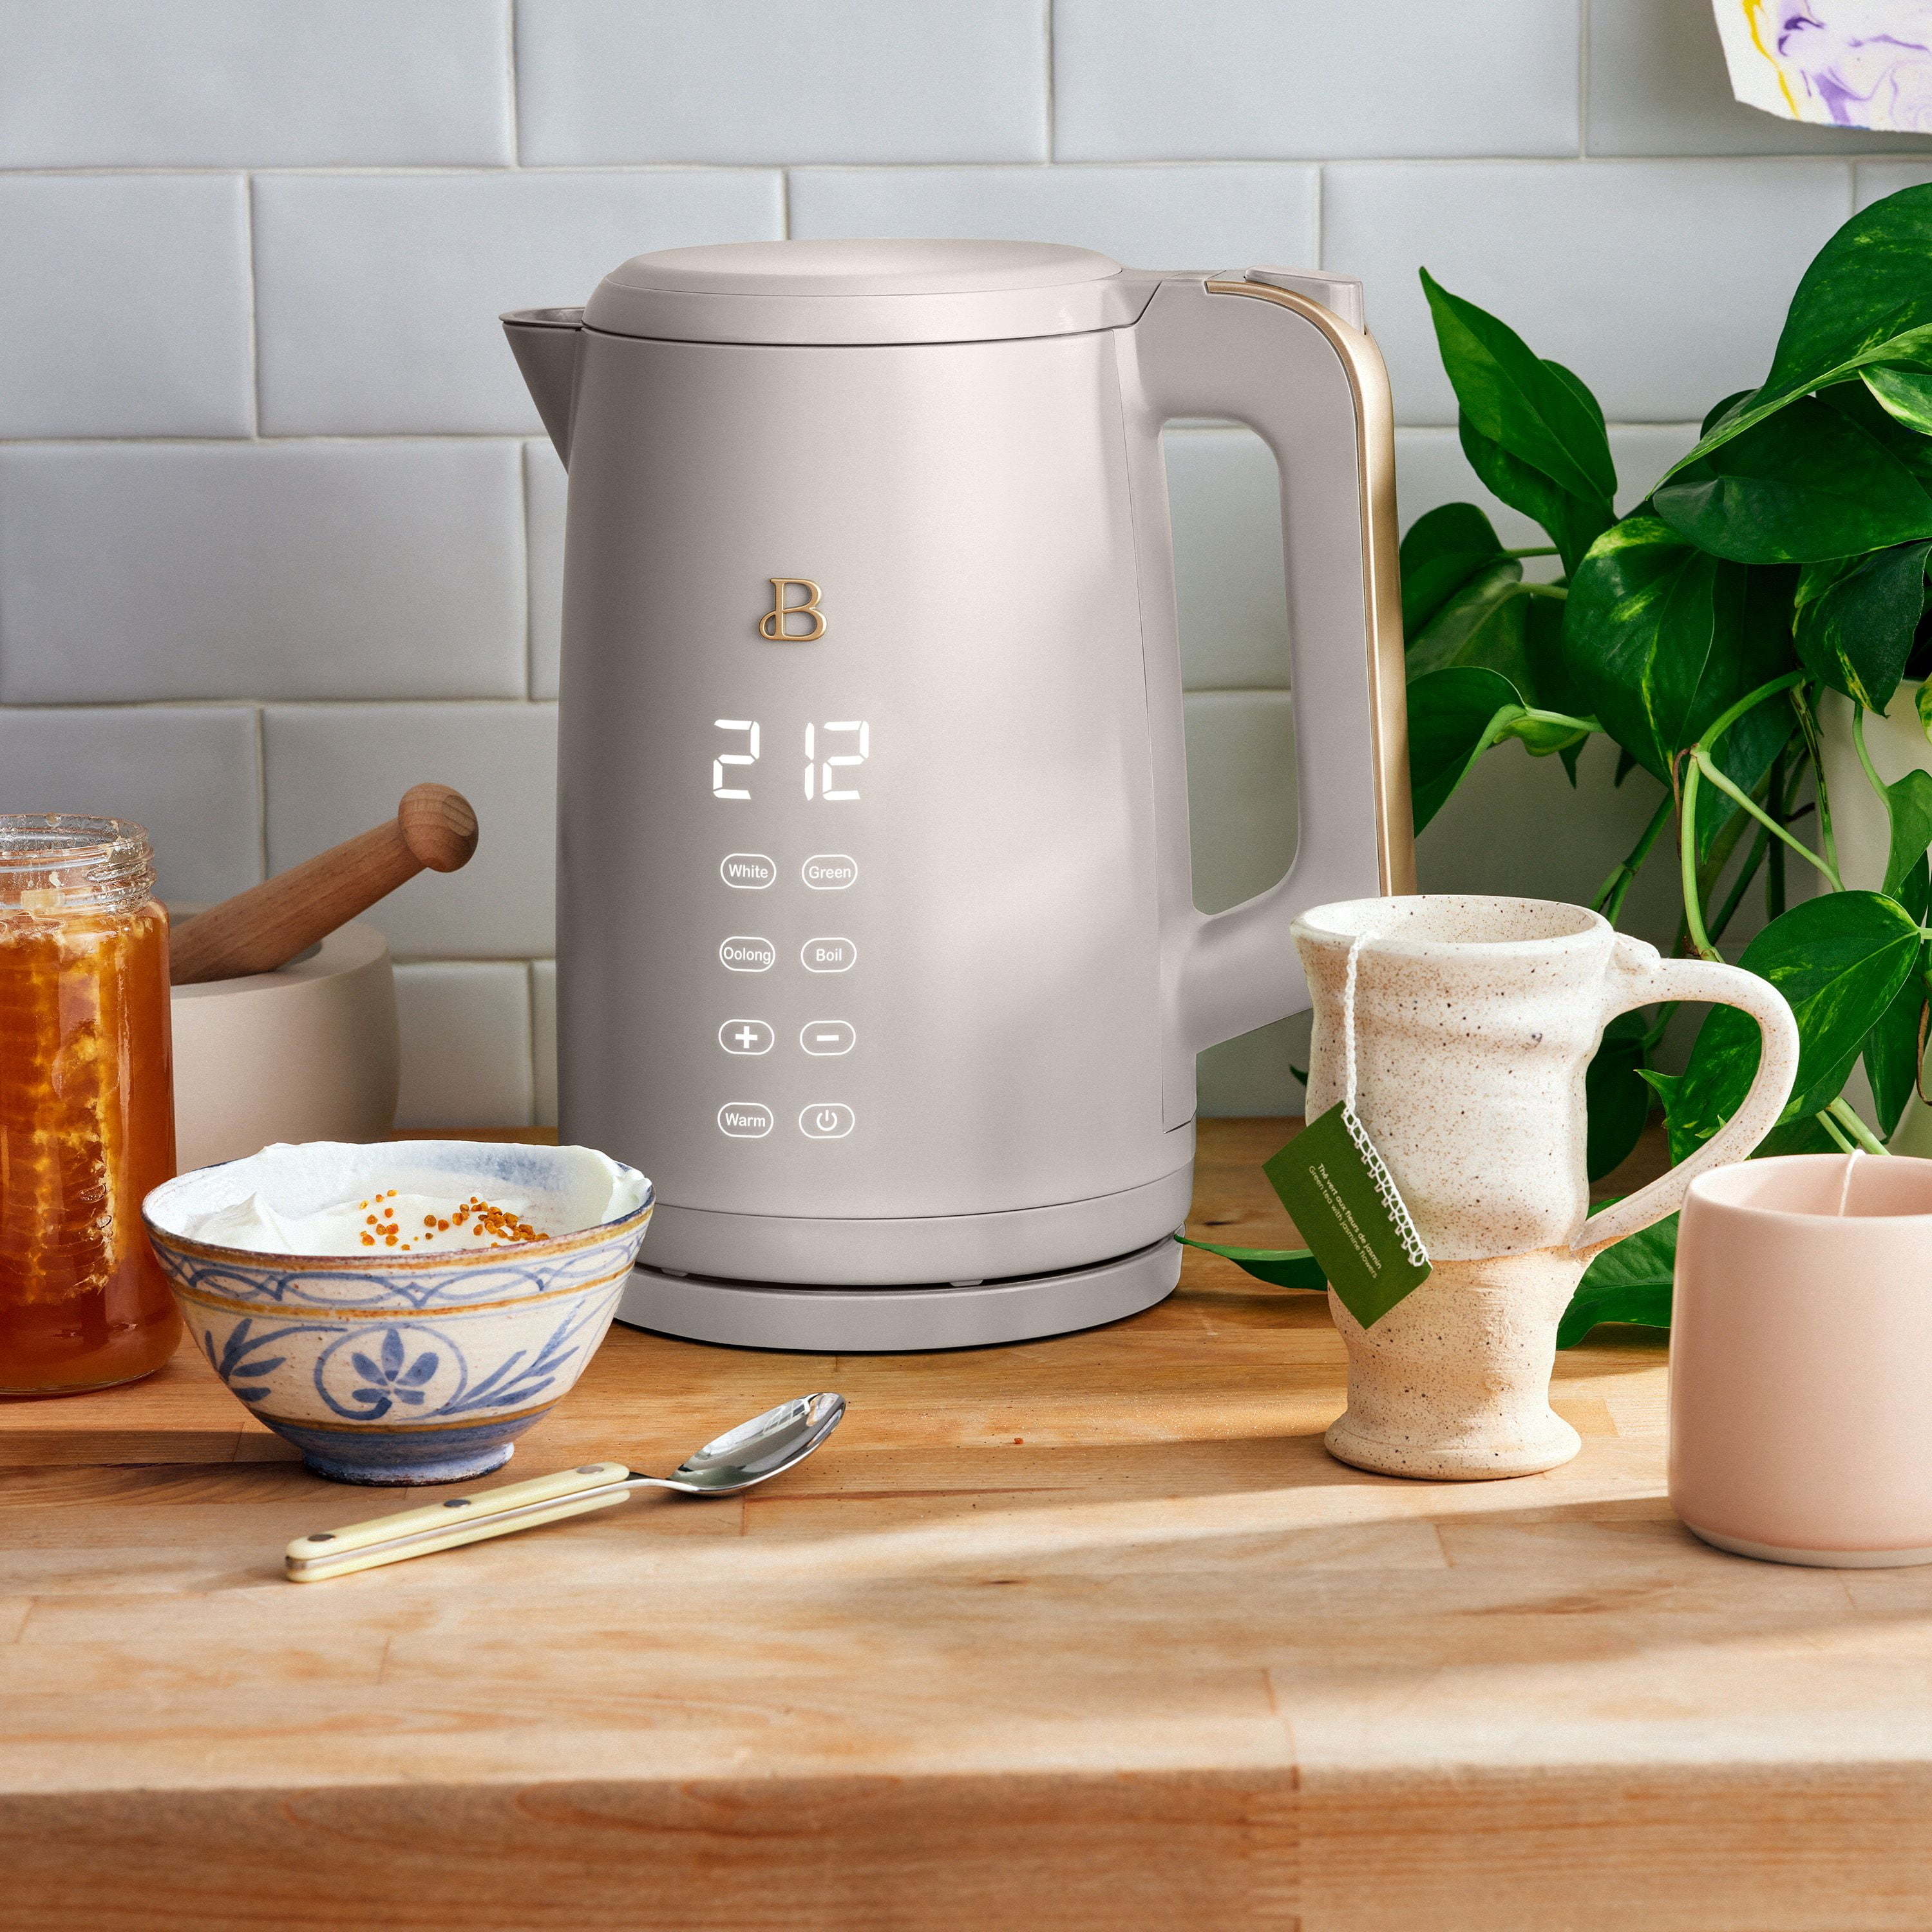 Electric kettle on kitchen counter with digital display, alongside a bowl, mug, and spoon